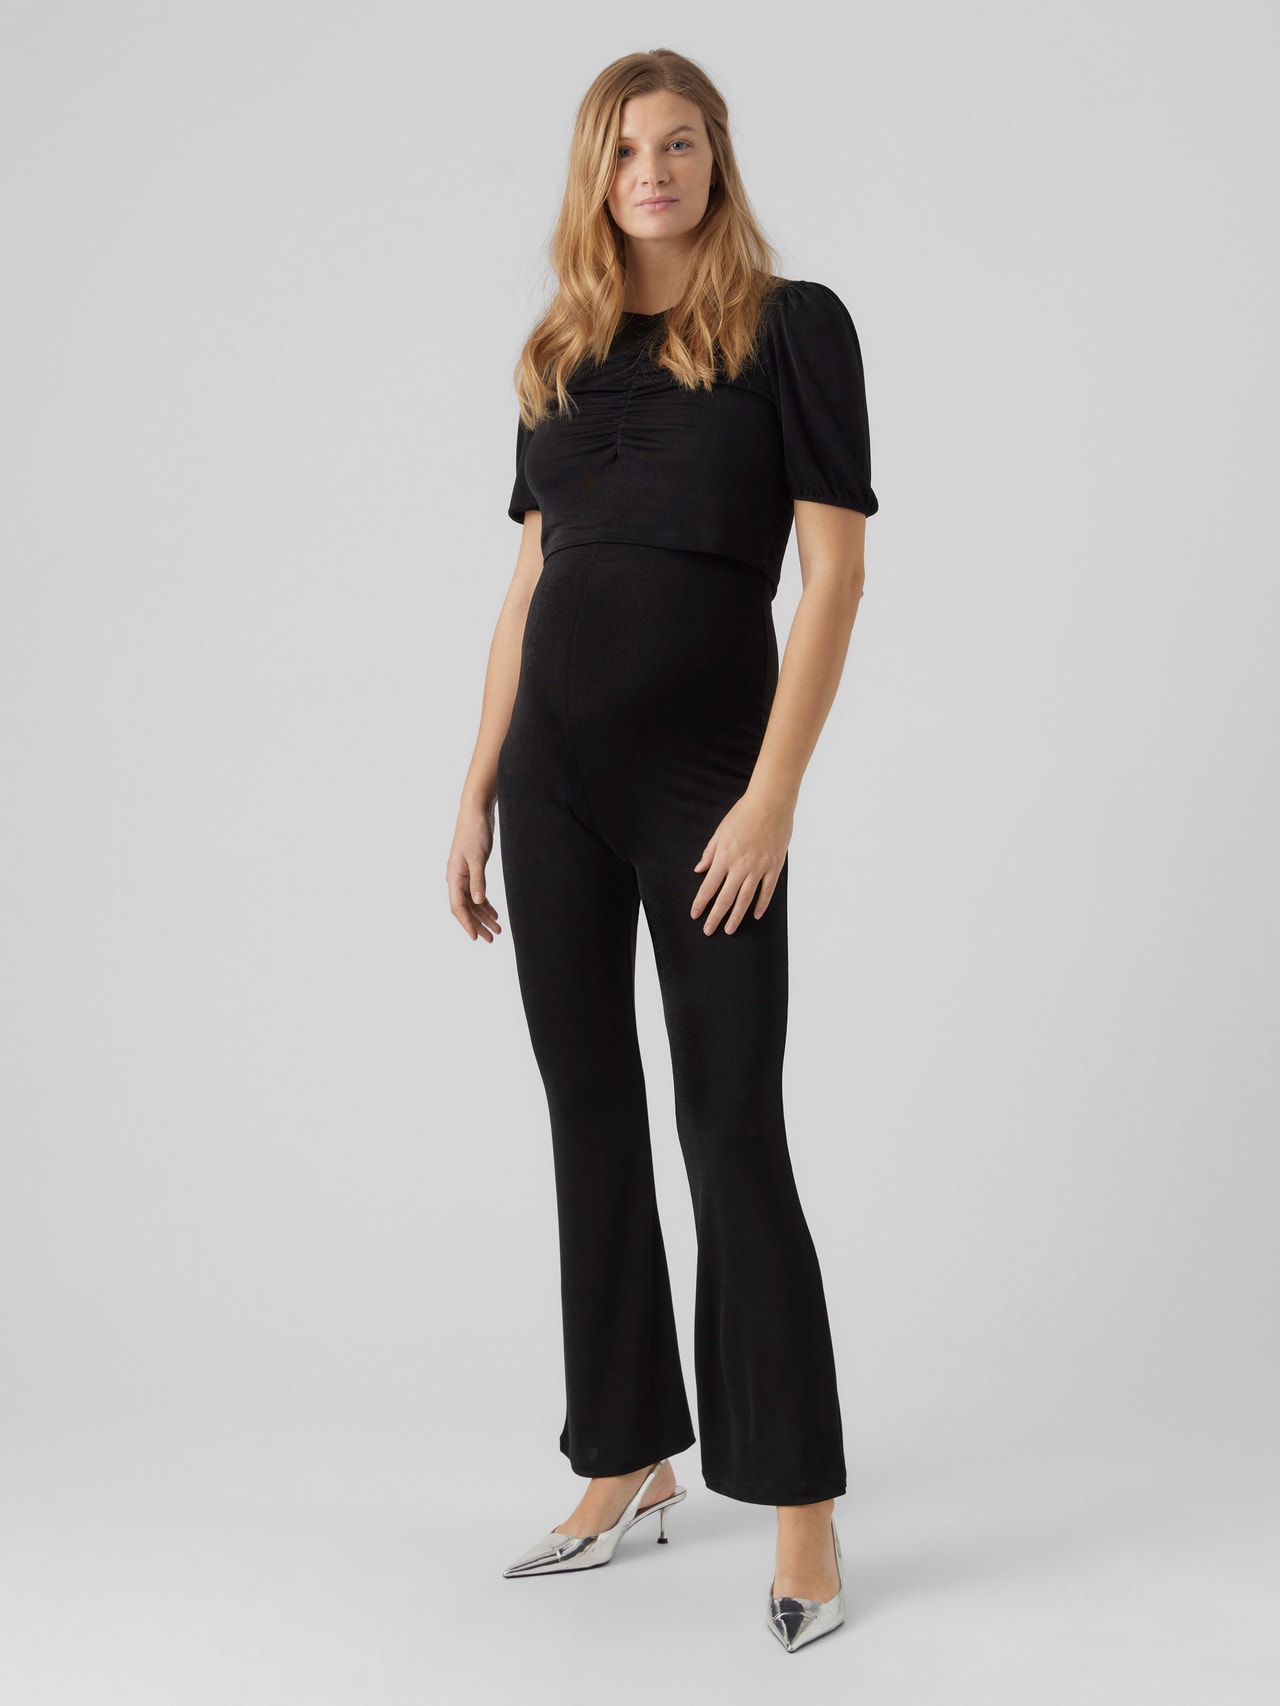 MAMA.LICIOUS Regular Fit High rise Trousers -Black - 20018568